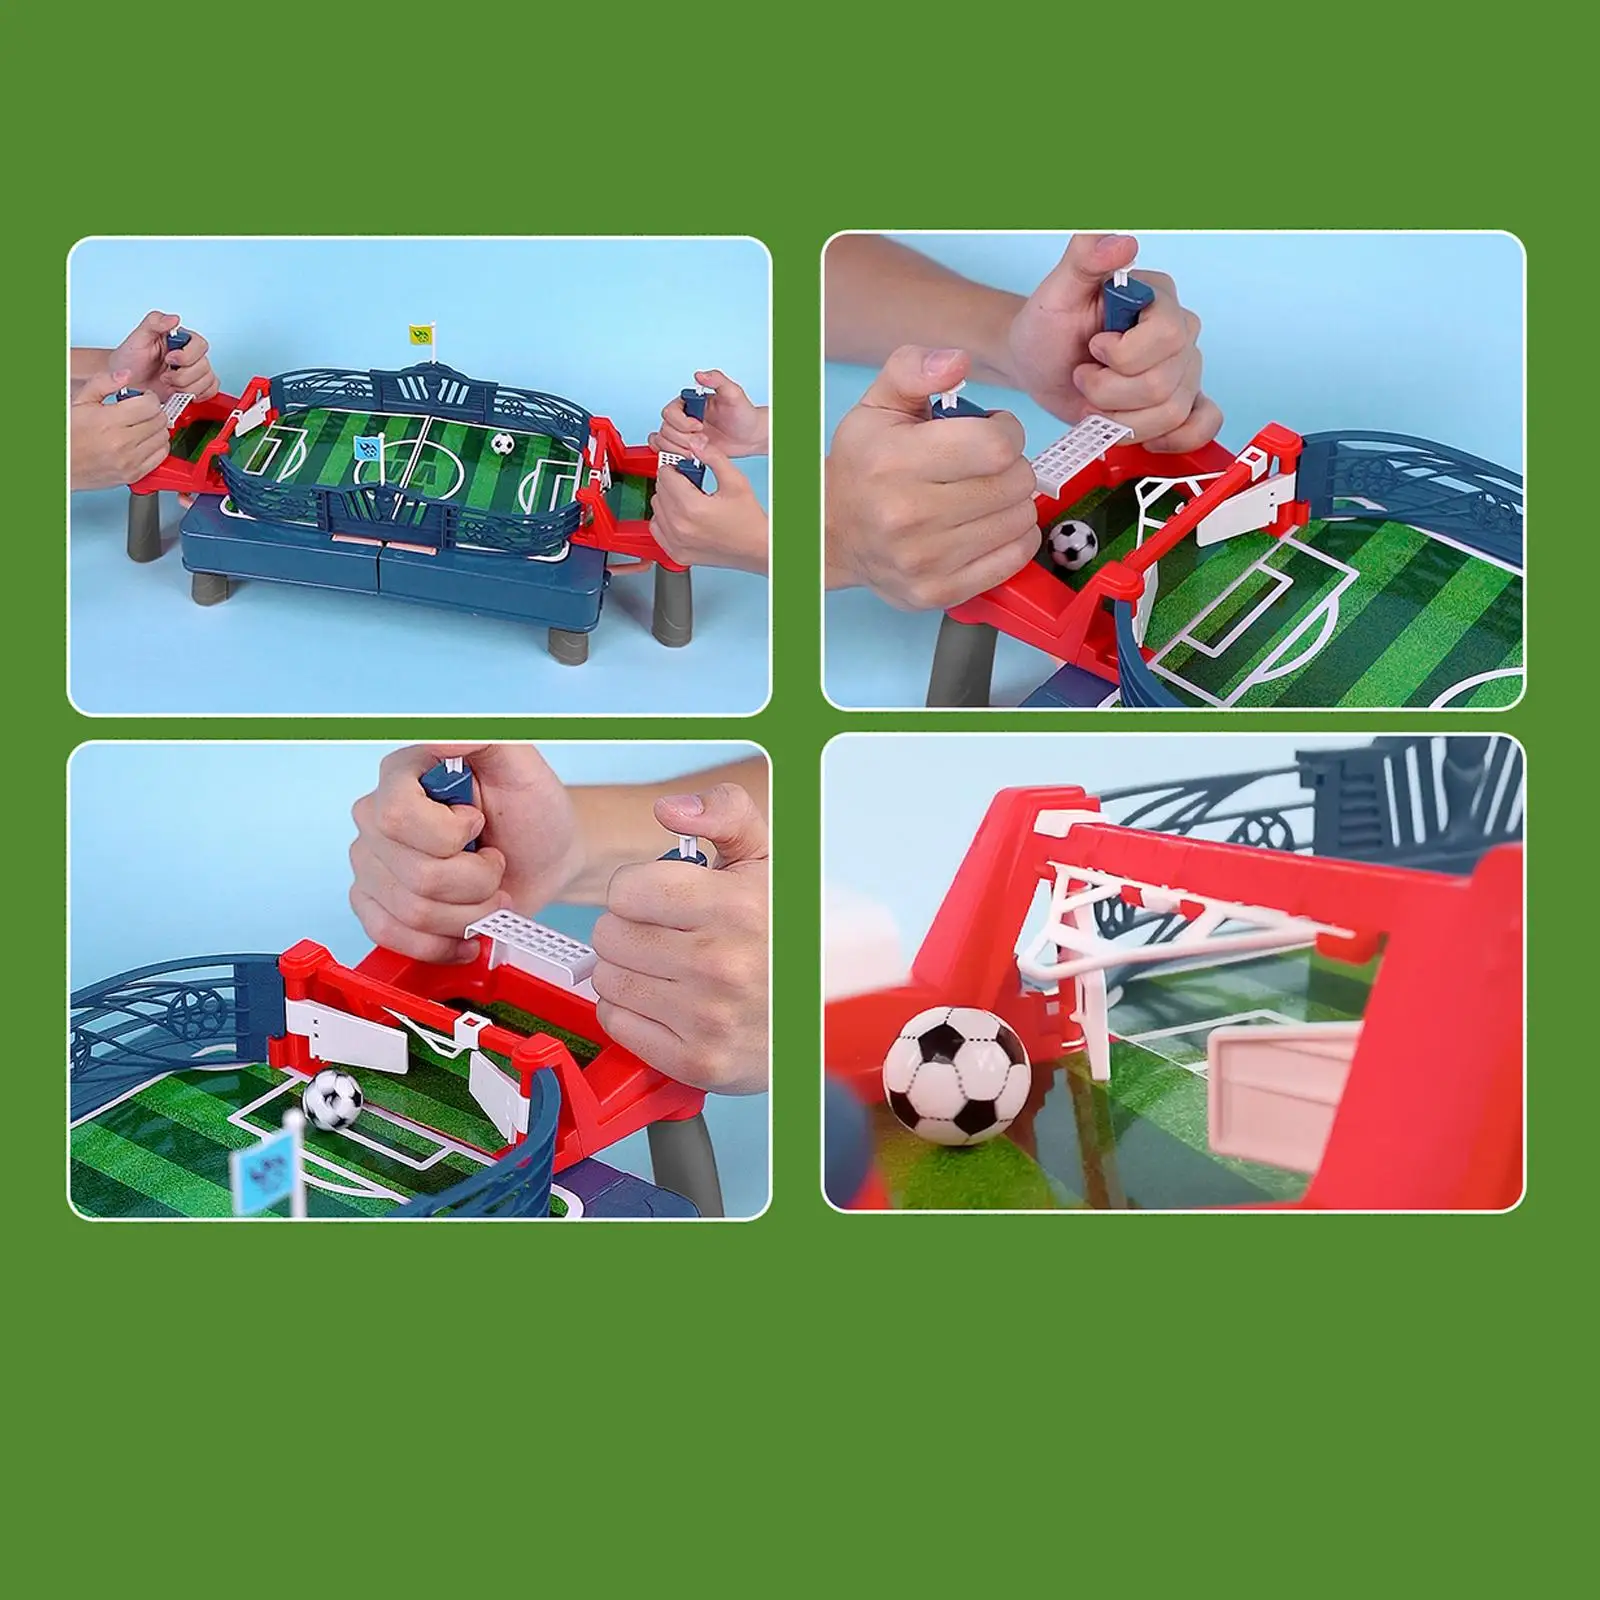 Small Competitive Soccer Games Play Ball Toys Party Game for Boys and Girls